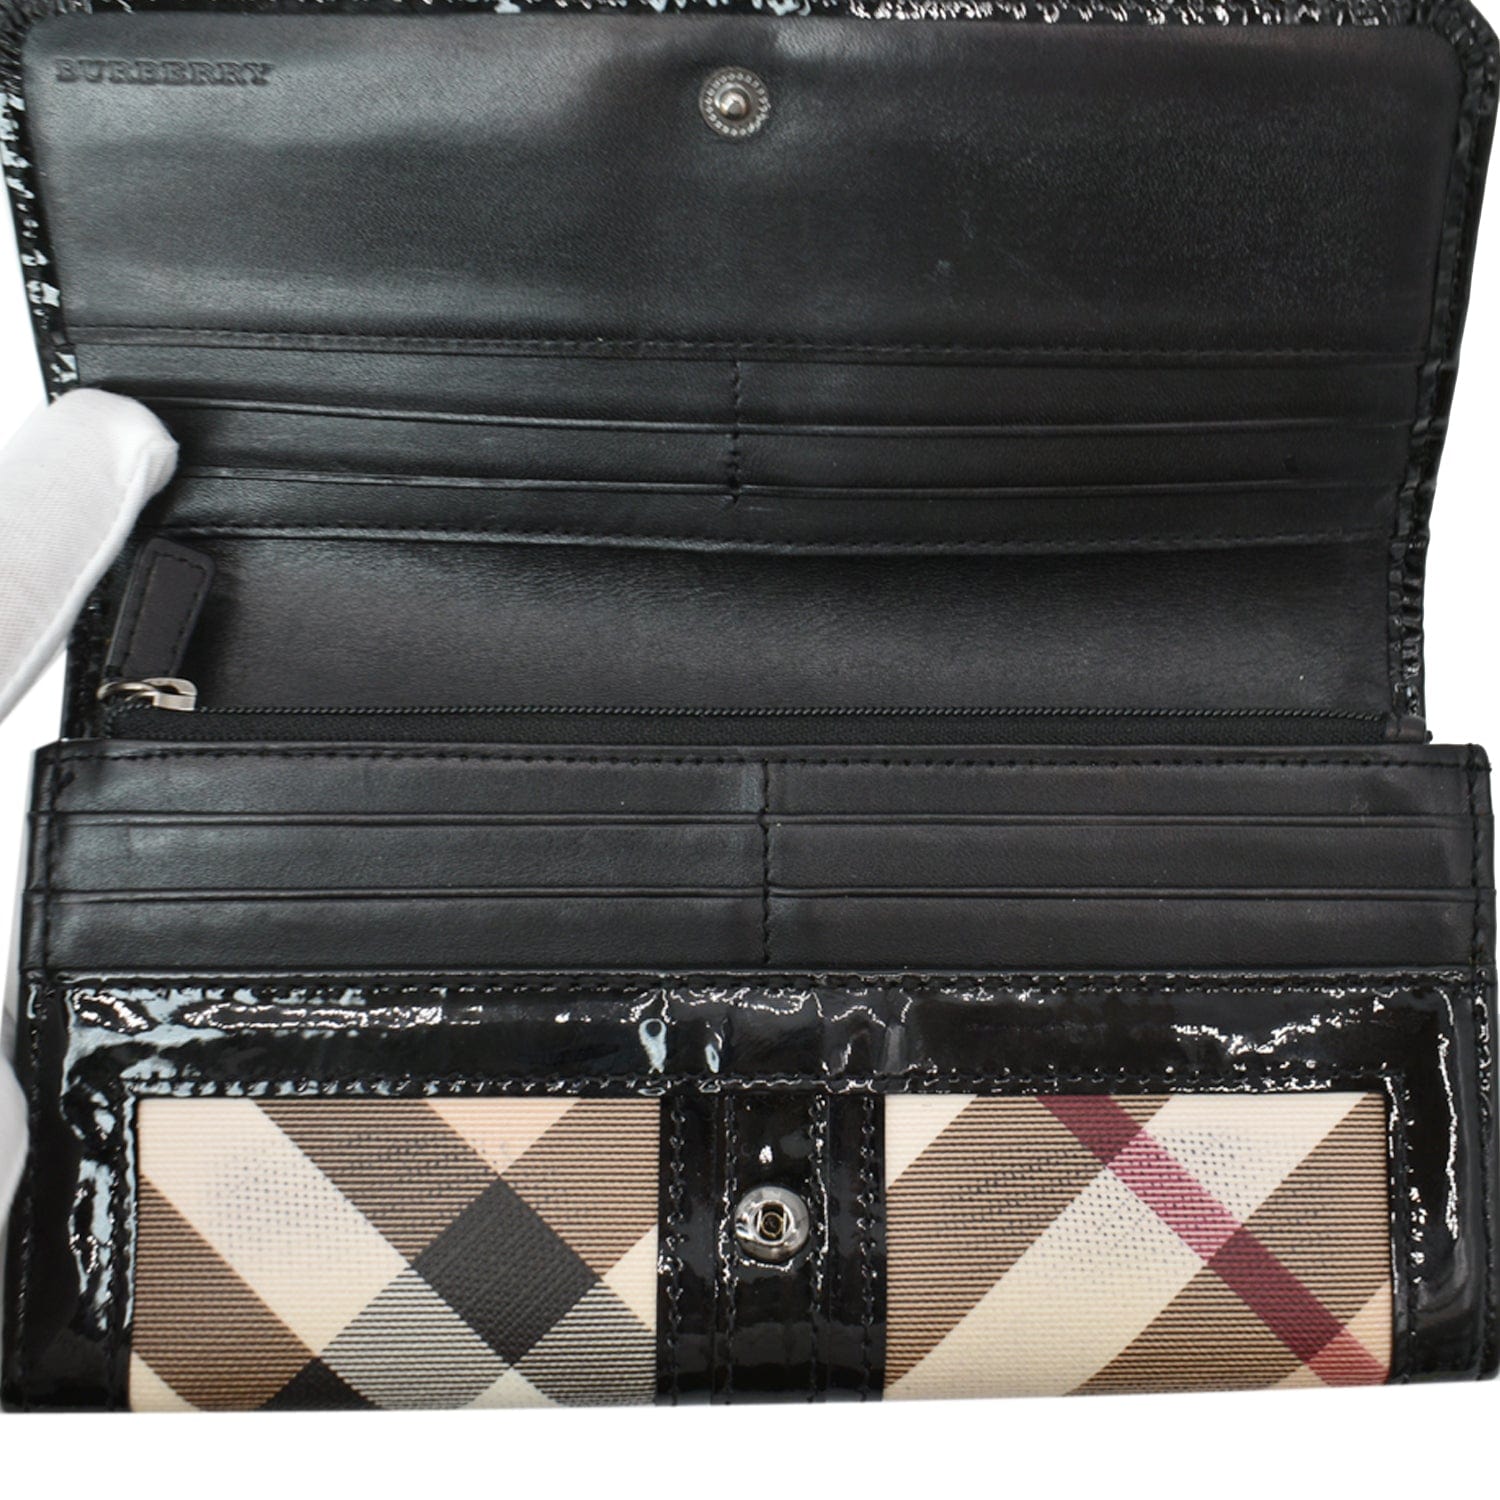 Burberry wallet made with traditional Burberry print and black patent  leather